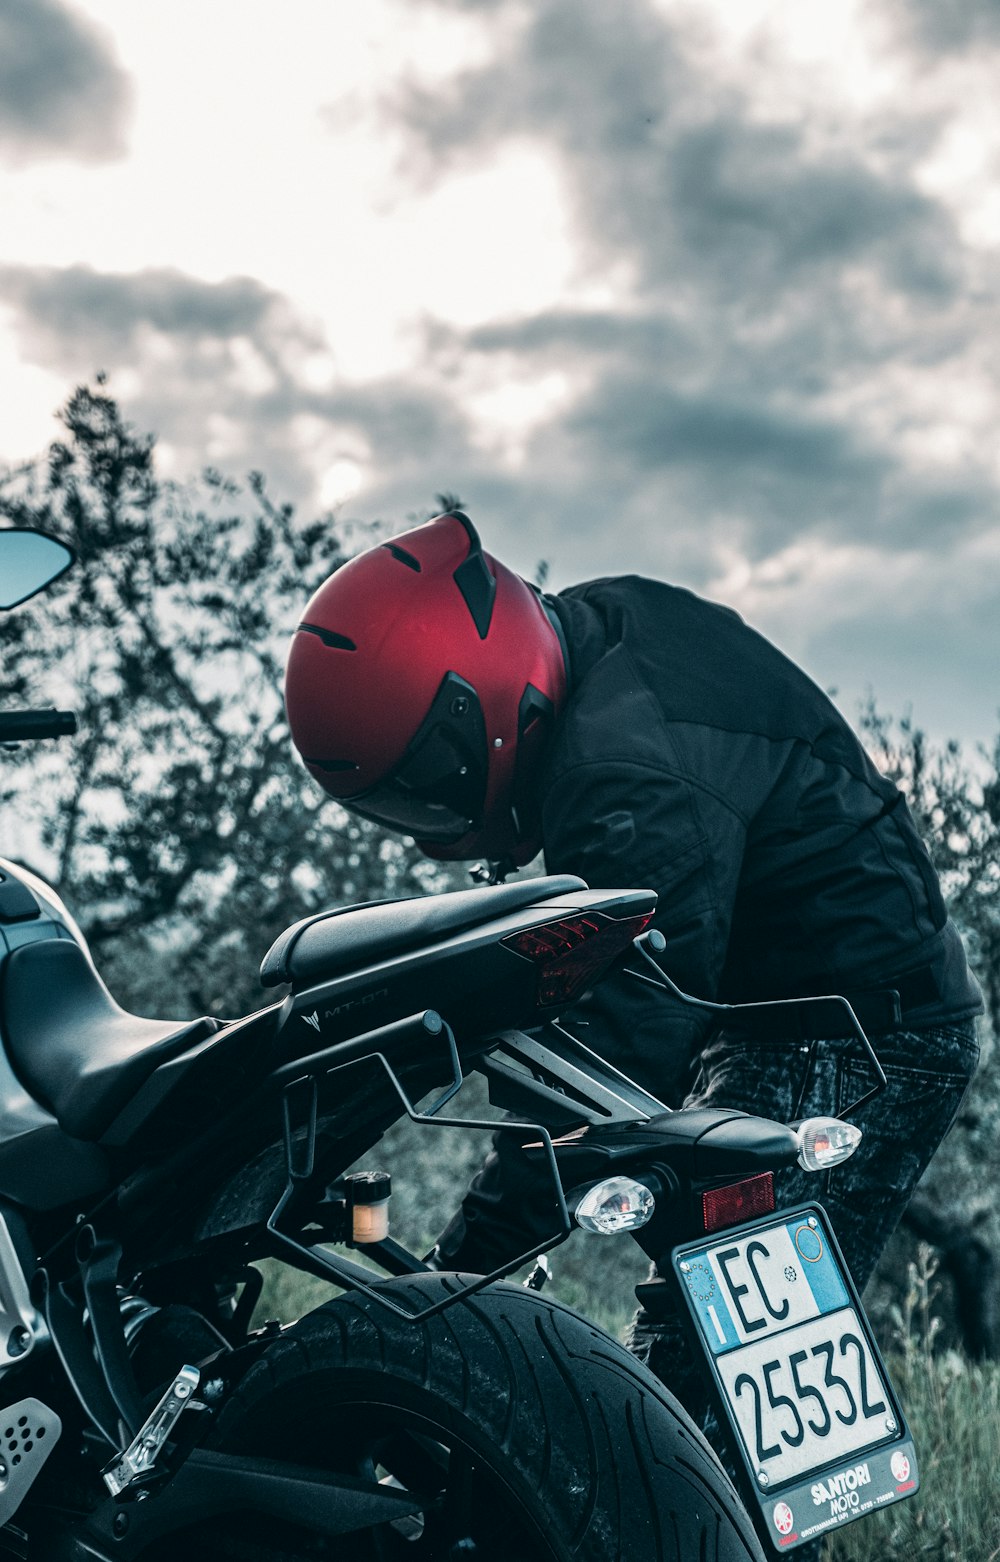 man in black jacket and red helmet riding motorcycle